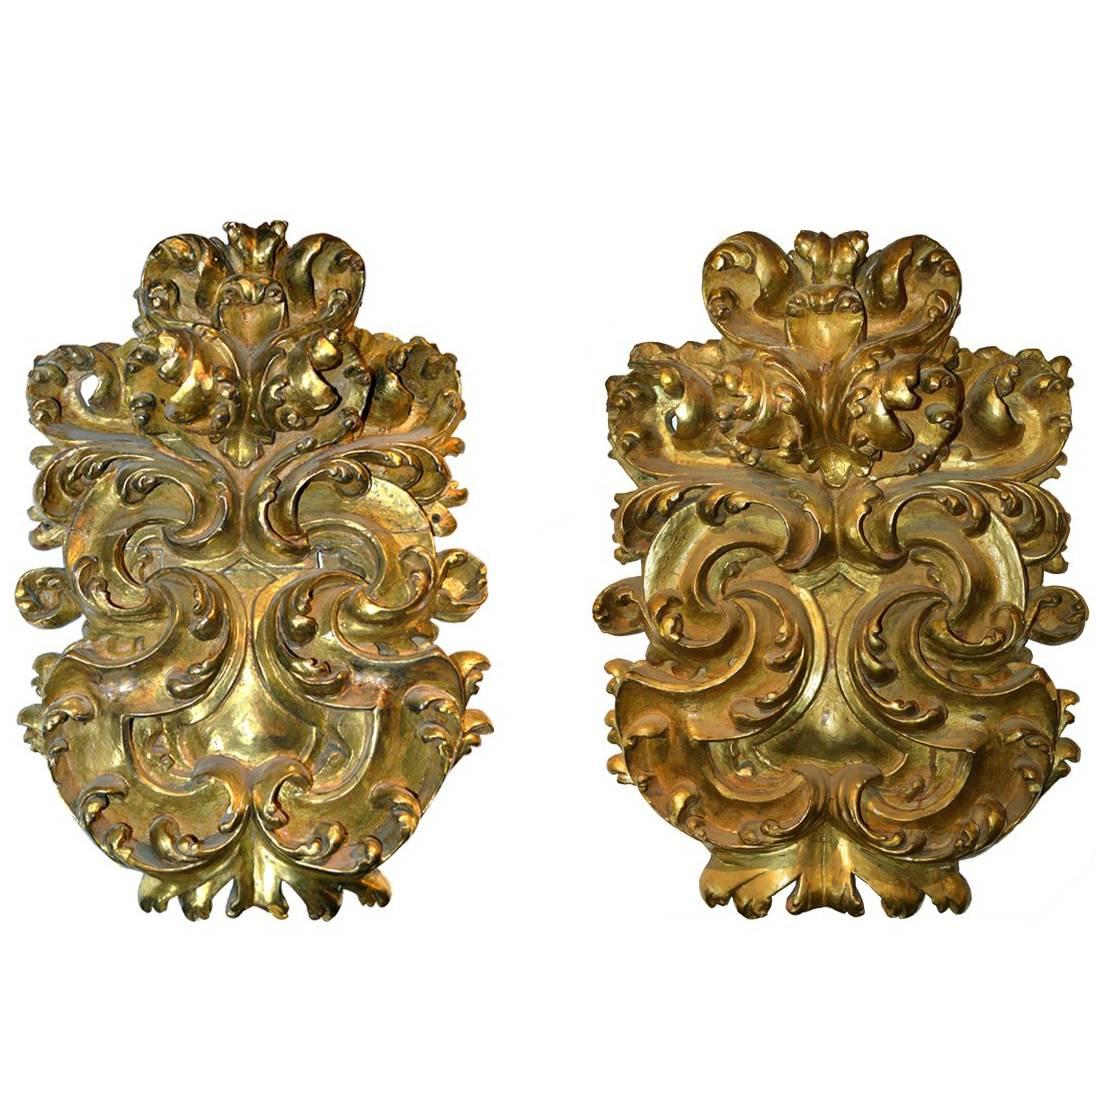 Massive Pair of 17th Century Baroque Italian Gold Gilt Wall Hangings or Sconces